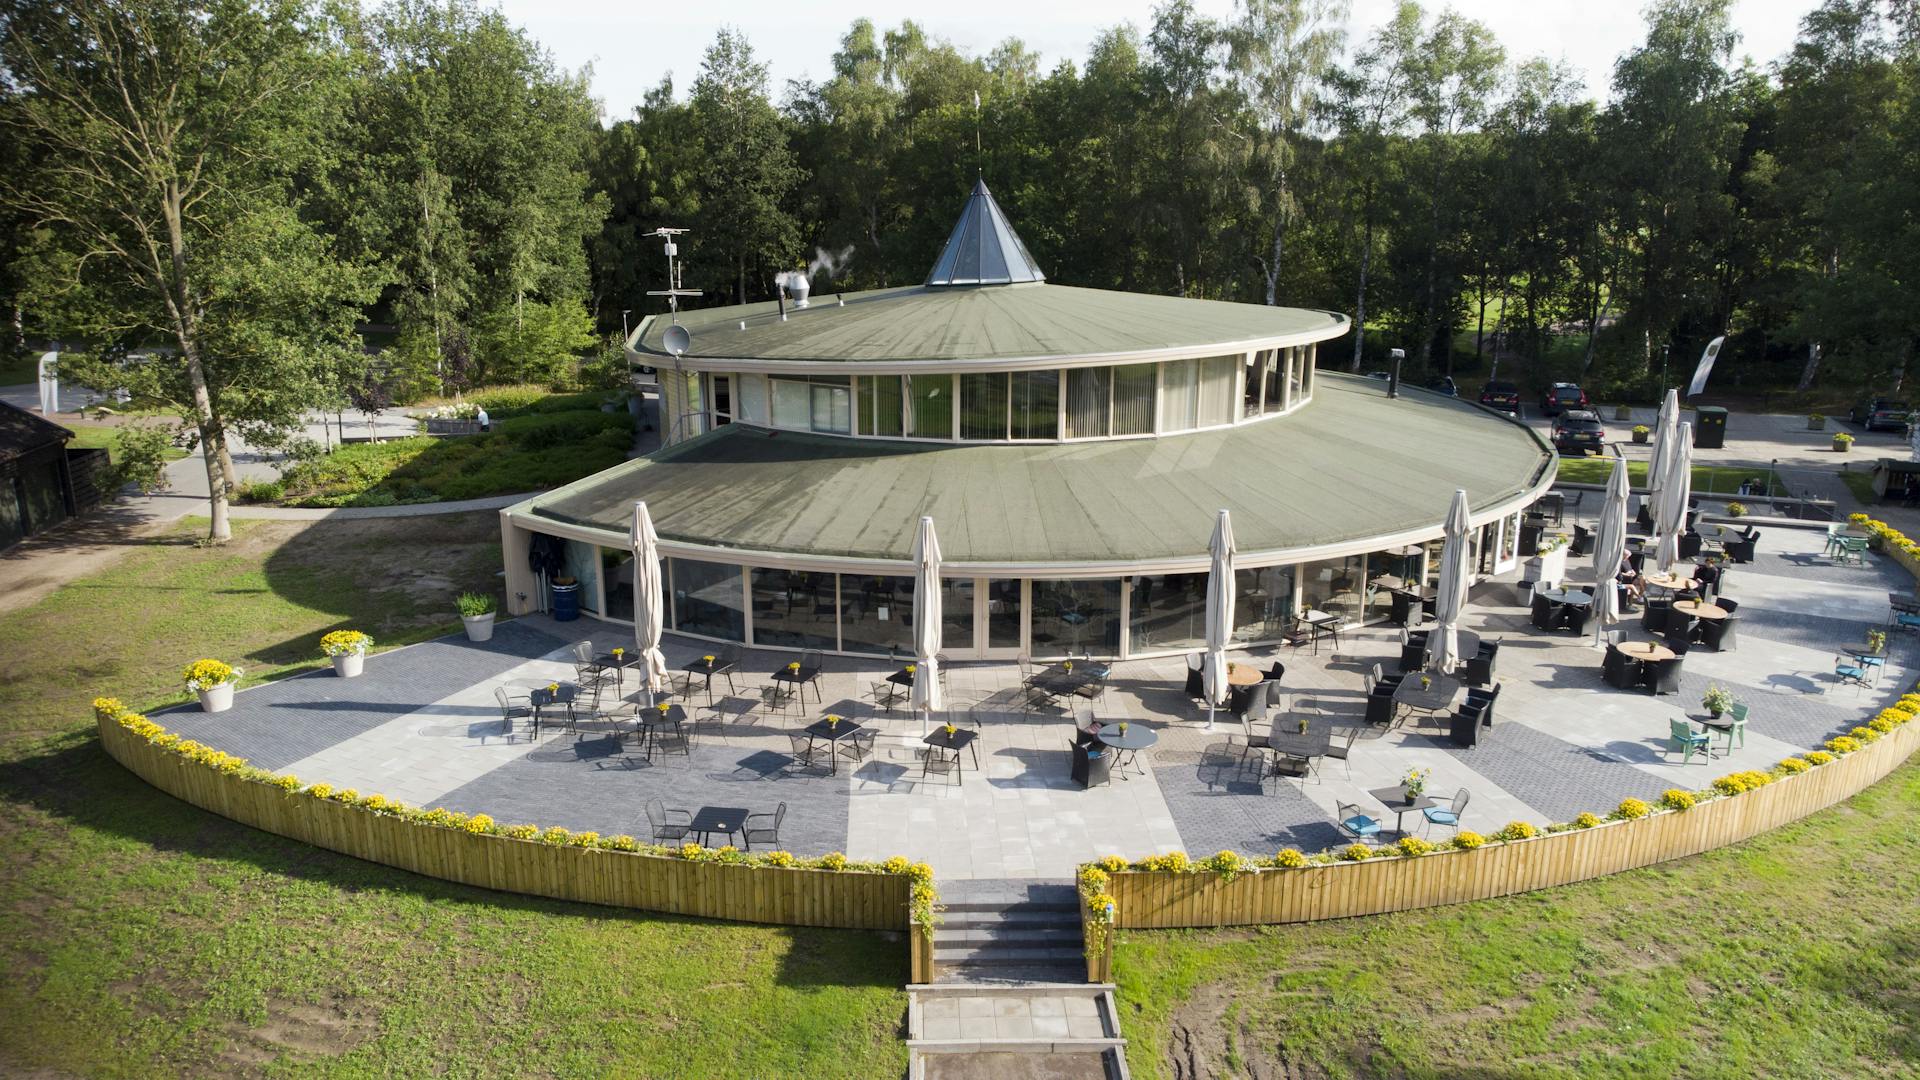 The clubhouse at Drentse Golfclub De Gelpenberg has everything from a bar to meeting accommodation. Source: Drentse Golfclub De Gelpenberg